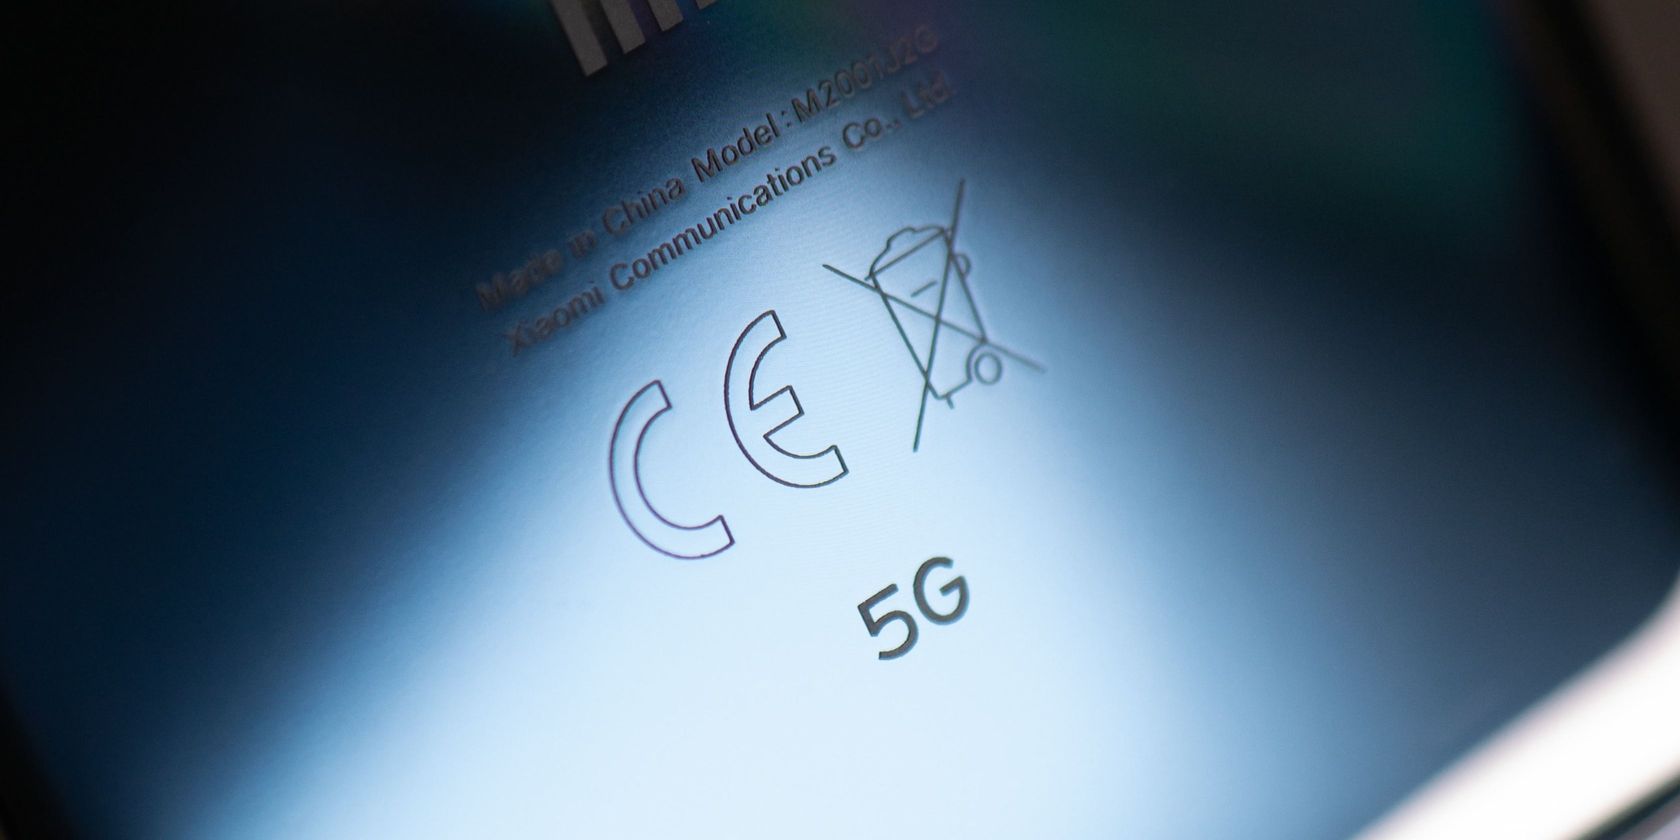 Is your iPhone 5G capable? Here’s How to Do It